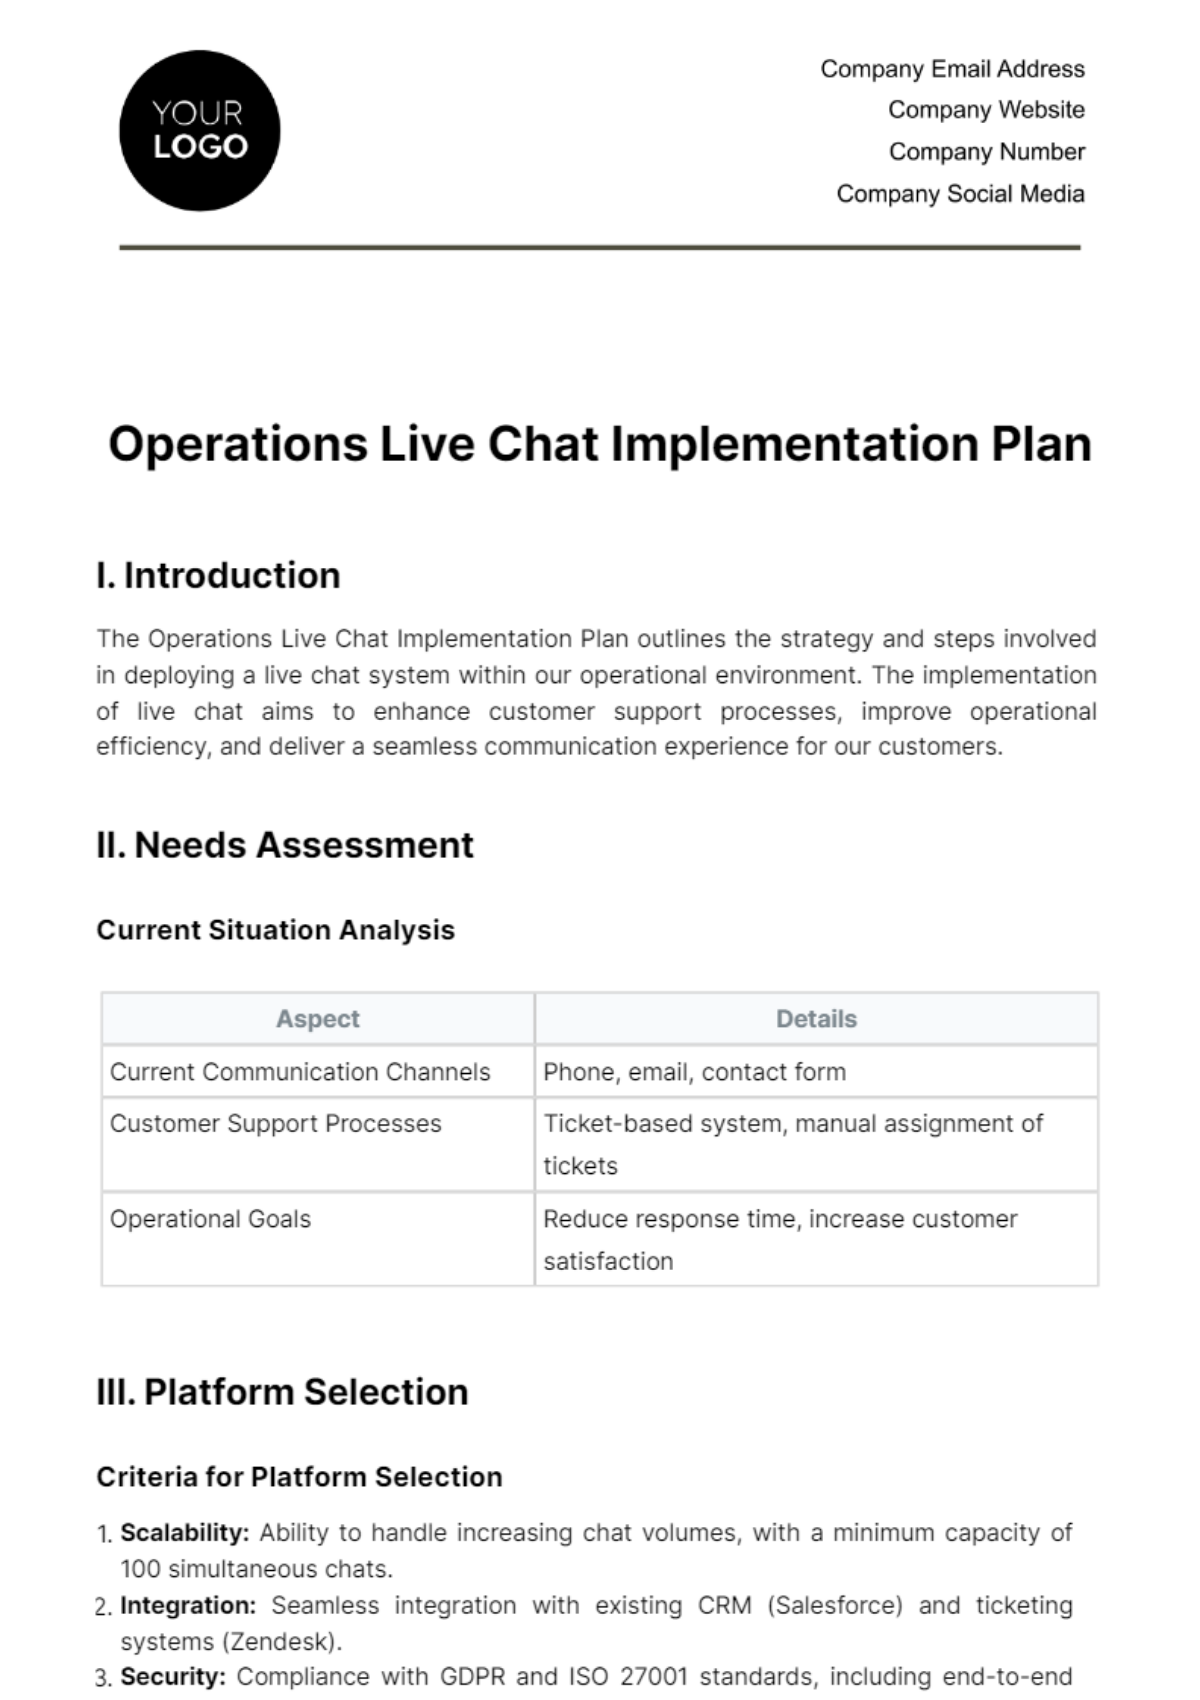 Operations Live Chat Implementation Plan Template